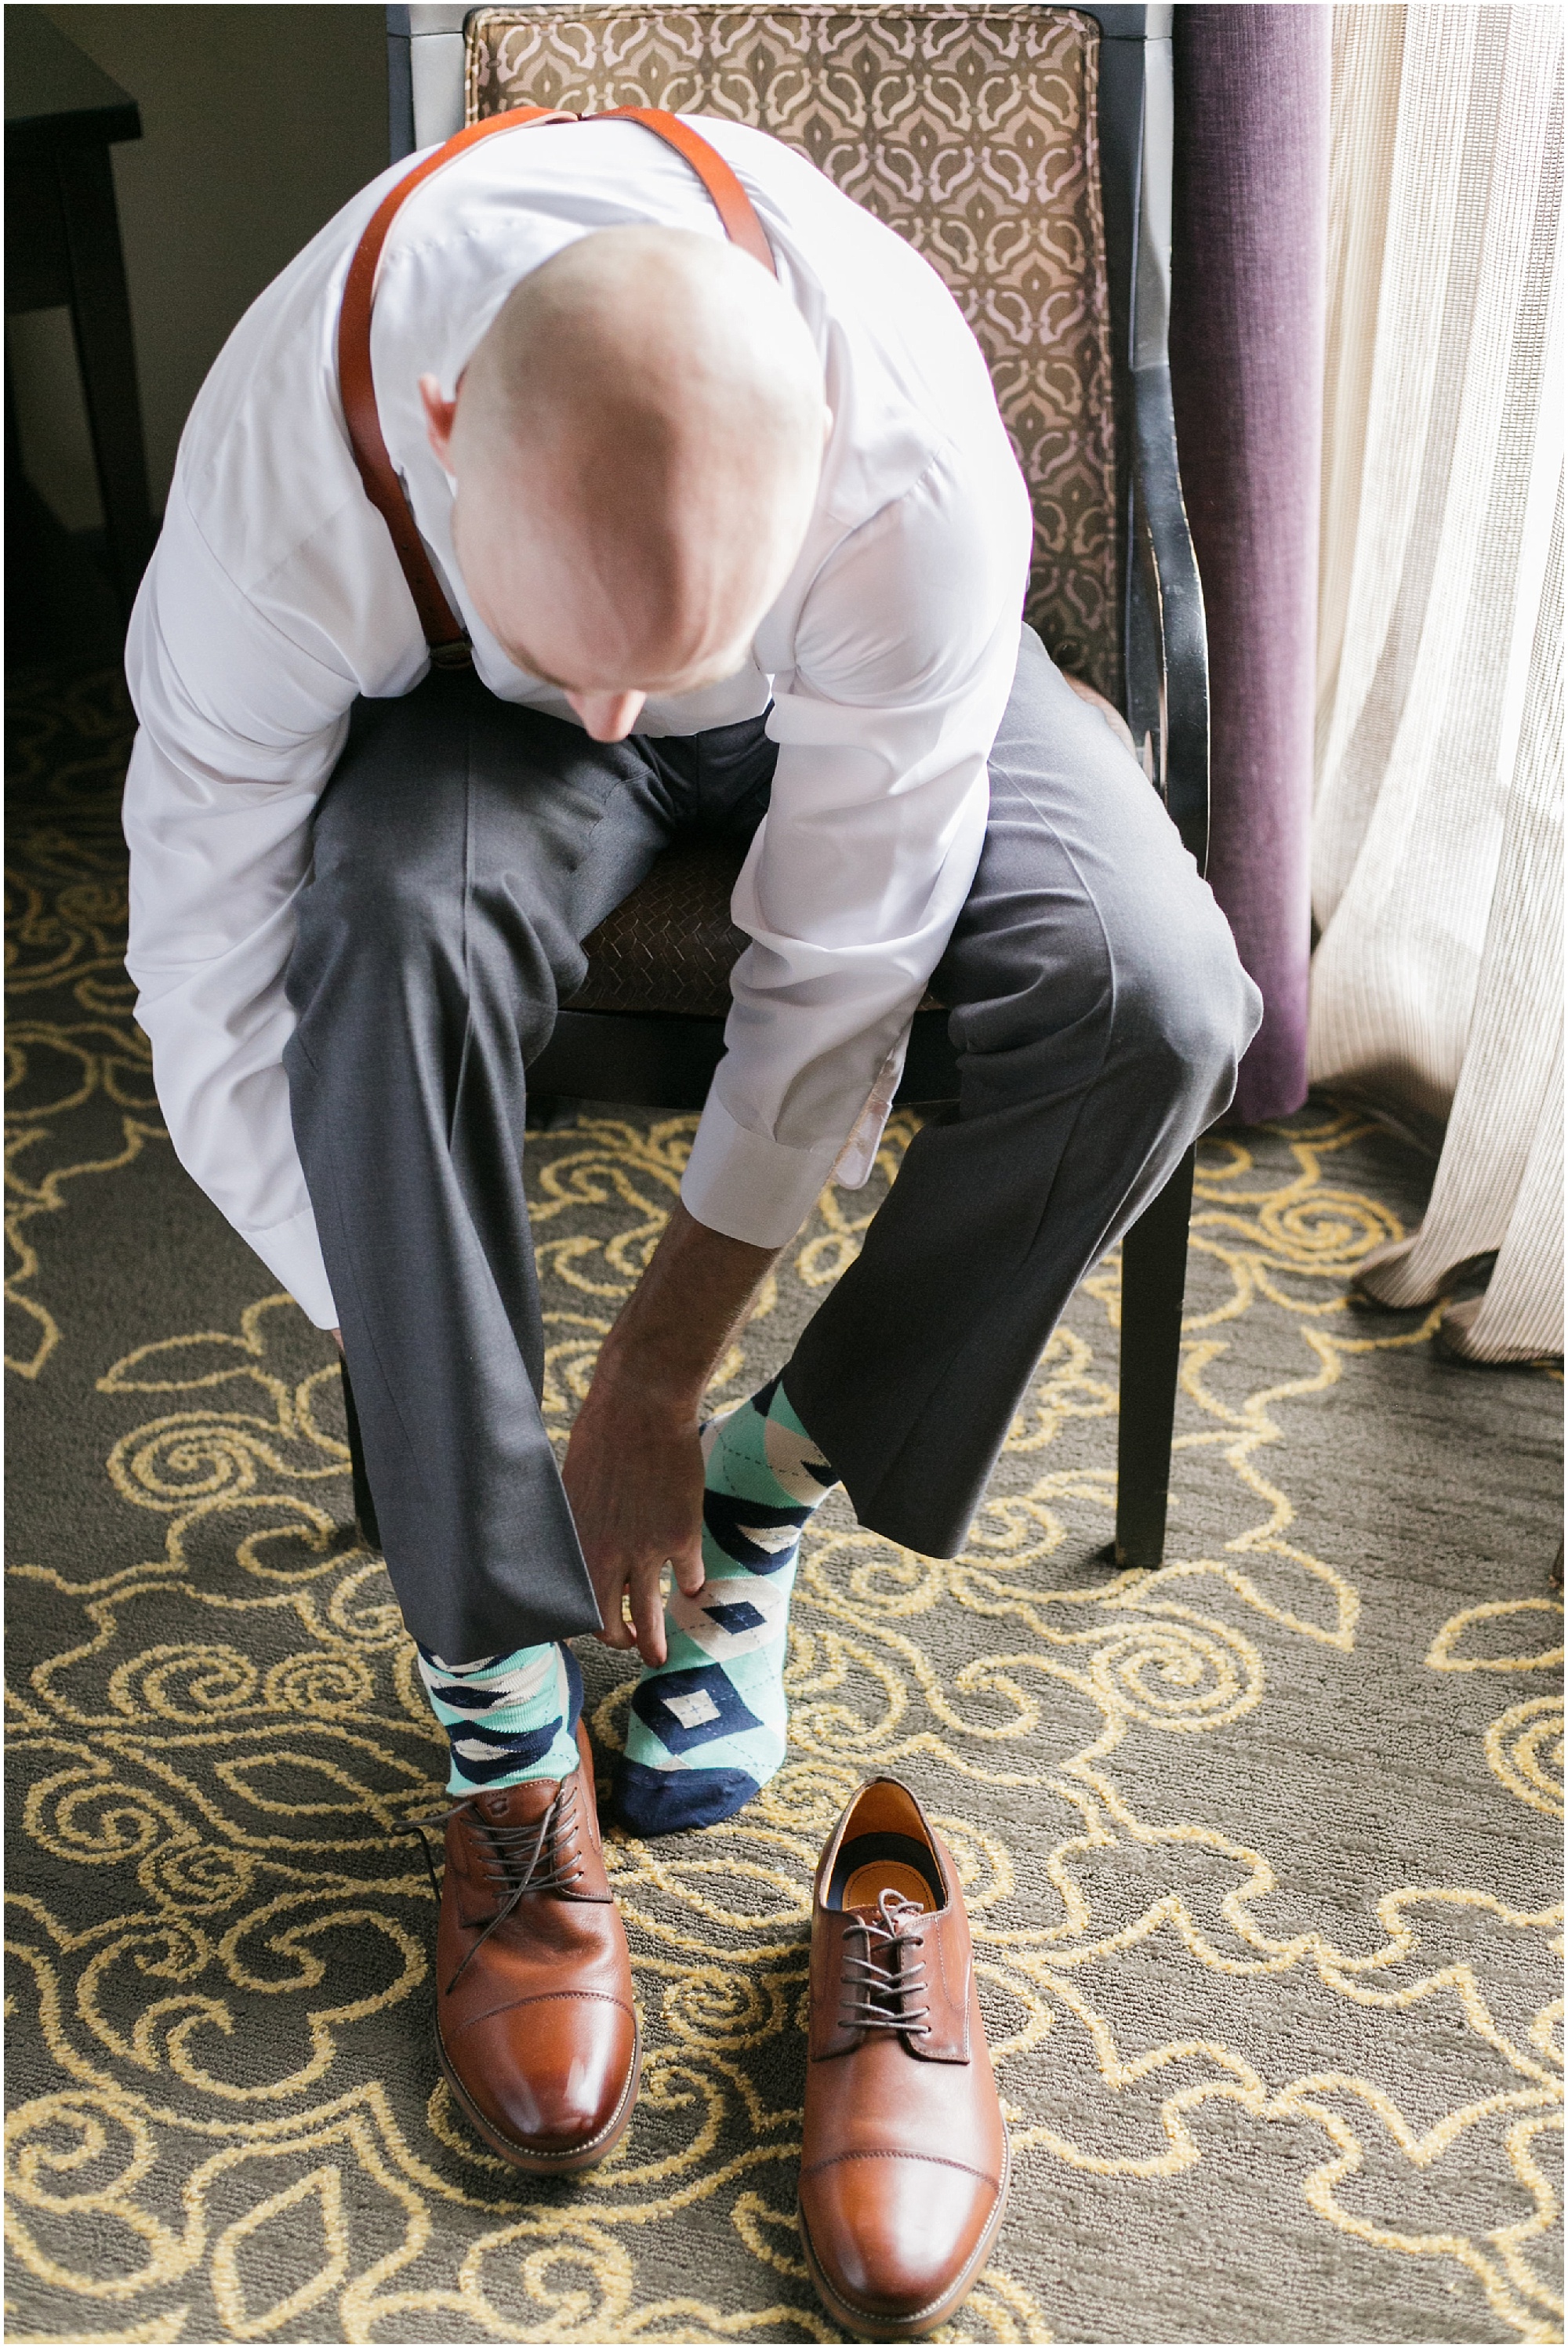 Groom putting on his shoes as he gets ready for his wedding.